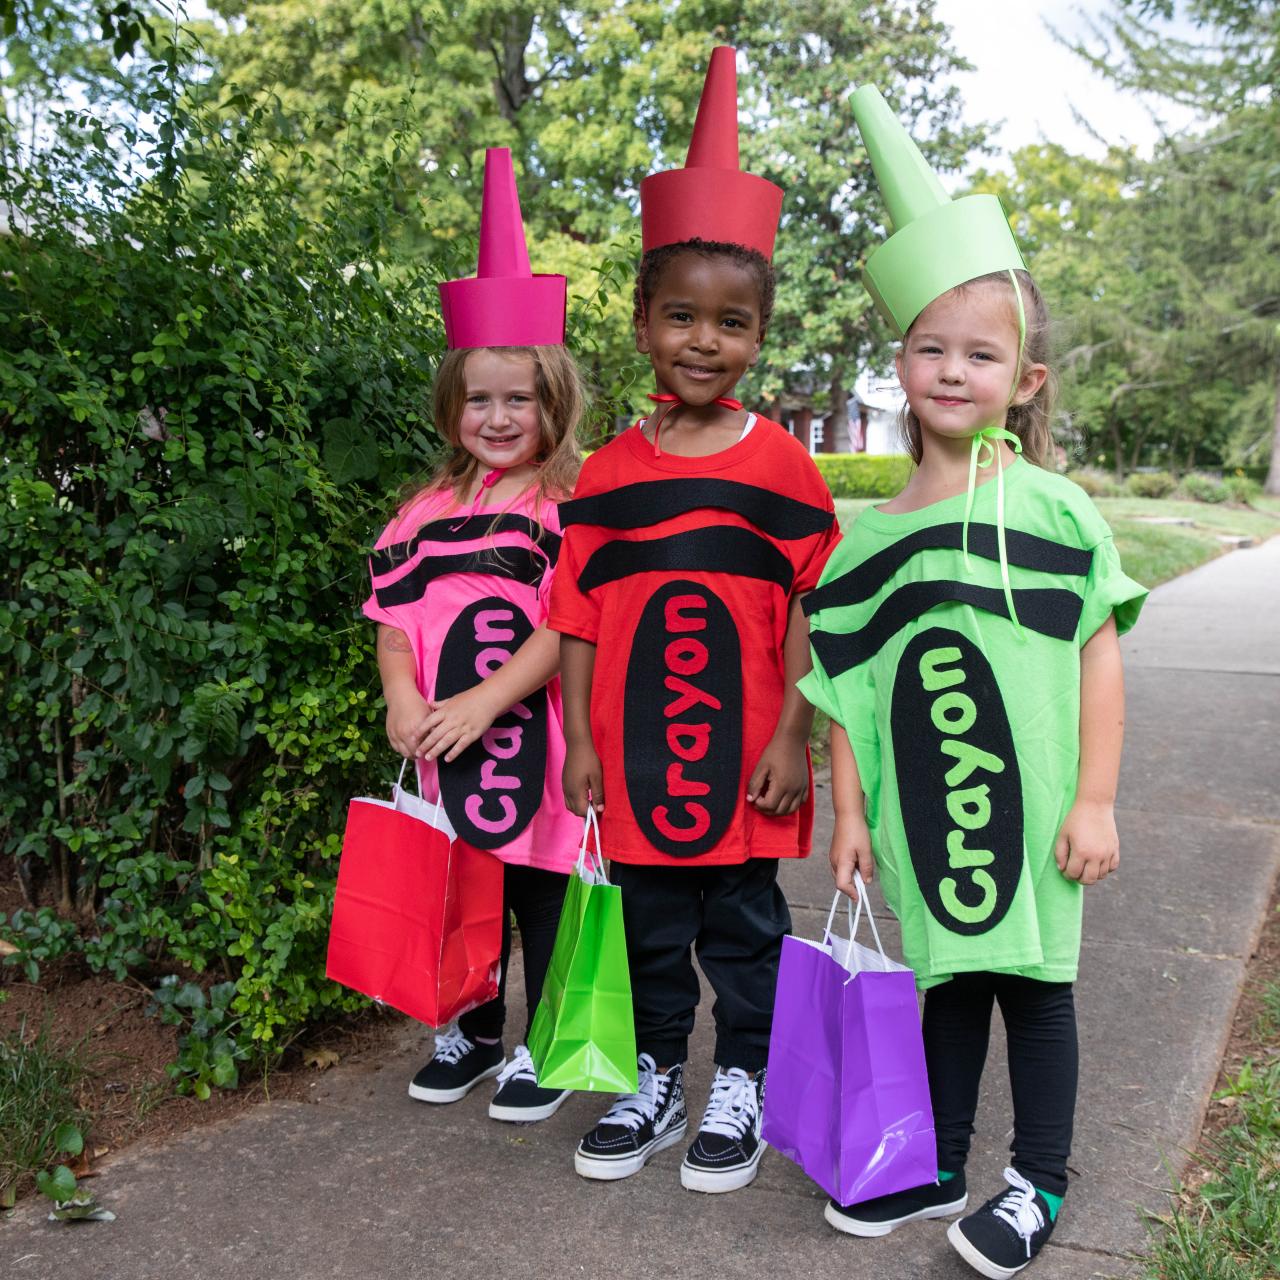 The Best Halloween Costume Ideas for Kids | Very